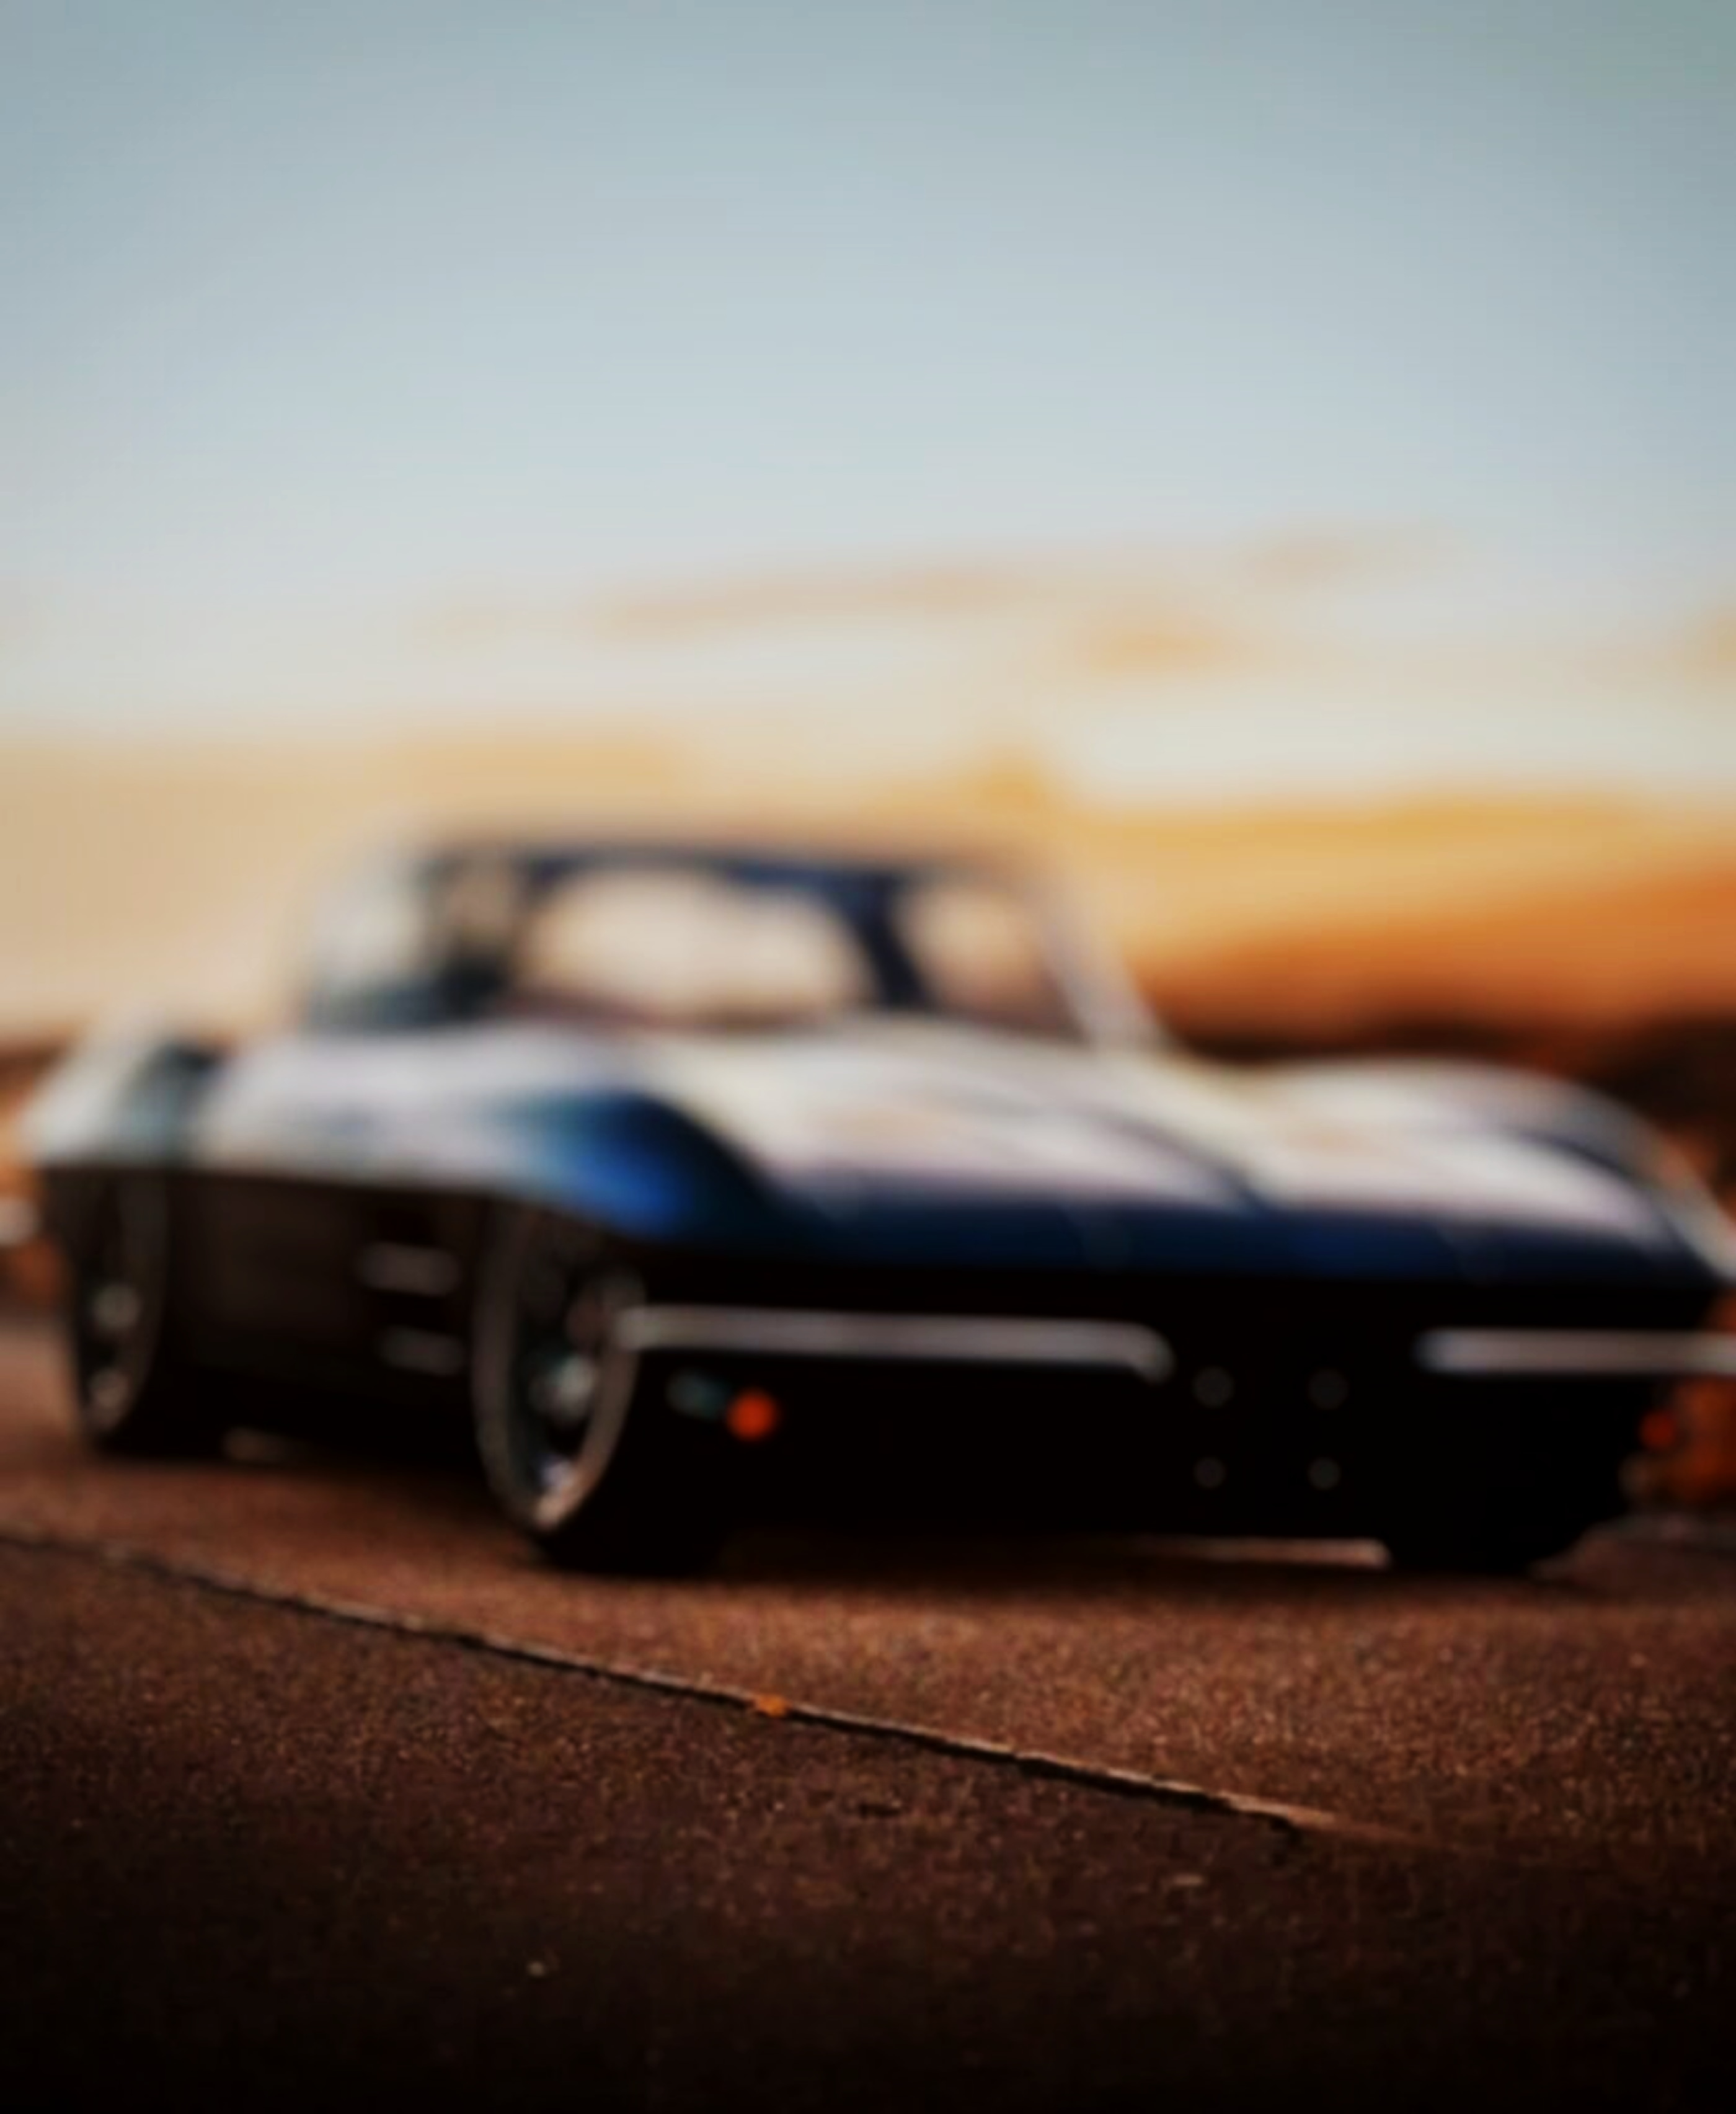 You are currently viewing Blur car image editing background download free